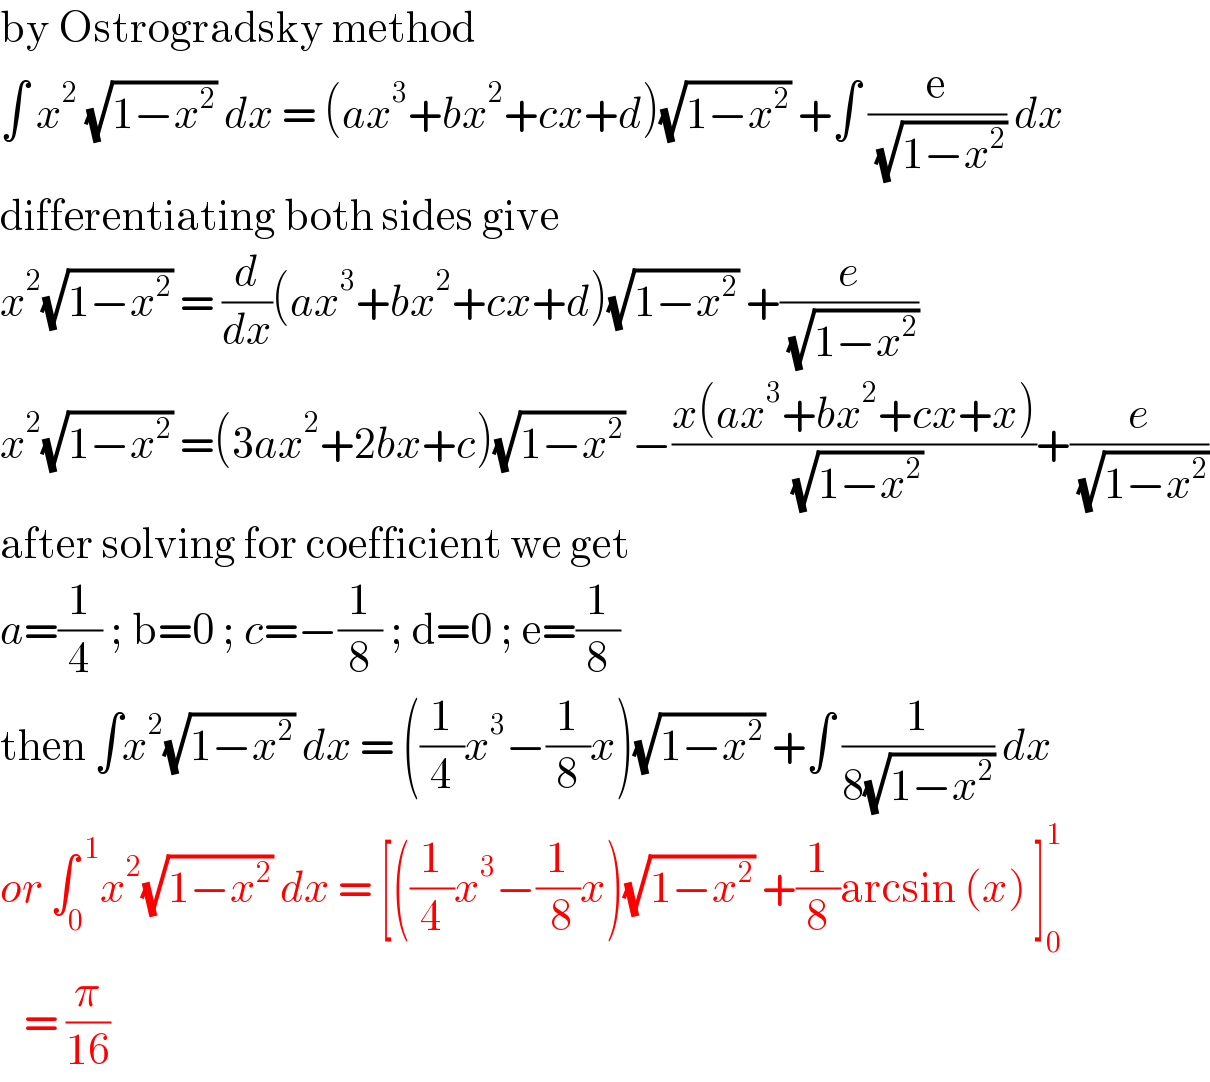 by Ostrogradsky method  ∫ x^2  (√(1−x^2 )) dx = (ax^3 +bx^2 +cx+d)(√(1−x^2 )) +∫ (e/( (√(1−x^2 )))) dx  differentiating both sides give   x^2 (√(1−x^2 )) = (d/dx)(ax^3 +bx^2 +cx+d)(√(1−x^2 )) +(e/( (√(1−x^2 ))))  x^2 (√(1−x^2 )) =(3ax^2 +2bx+c)(√(1−x^2 )) −((x(ax^3 +bx^2 +cx+x))/( (√(1−x^2 ))))+(e/( (√(1−x^2 ))))  after solving for coefficient we get   a=(1/4) ; b=0 ; c=−(1/8) ; d=0 ; e=(1/8)  then ∫x^2 (√(1−x^2 )) dx = ((1/4)x^3 −(1/8)x)(√(1−x^2 )) +∫ (1/(8(√(1−x^2 )))) dx  or ∫_0 ^( 1) x^2 (√(1−x^2 )) dx = [((1/4)x^3 −(1/( 8))x)(√(1−x^2 )) +(1/8)arcsin (x) ]_0 ^1      = (π/(16))   